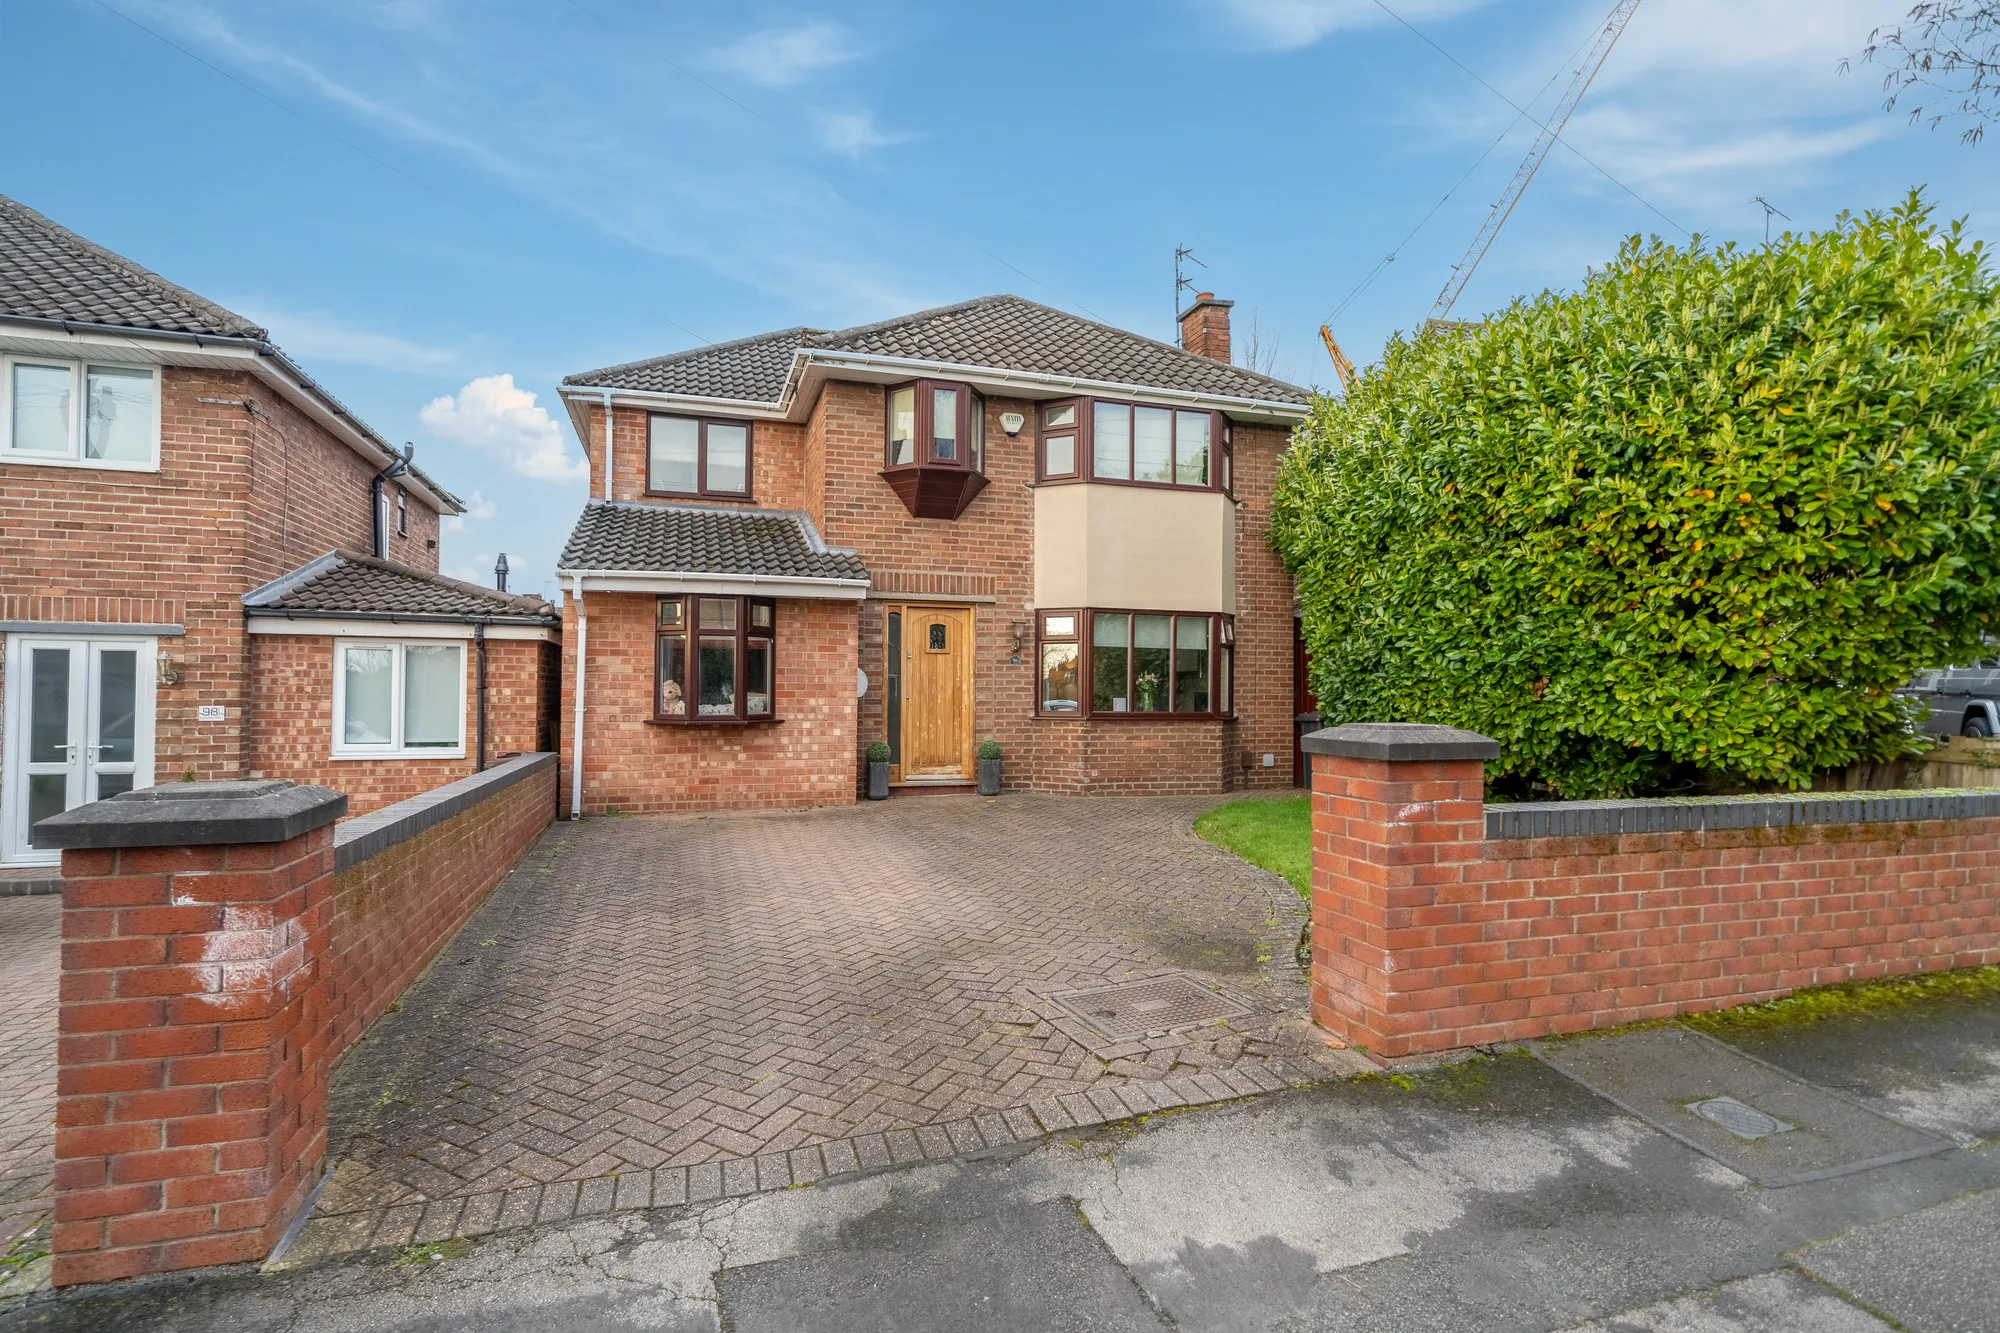 Transformed 4-bed detached house in sought-after Maghull location. Stylish interior with spacious reception kitchen, living areas, and modern bathroom. Expansive lawn garden, off-road parking, and peaceful retreat awaits outside. A dream home for a magical lifestyle upgrade.